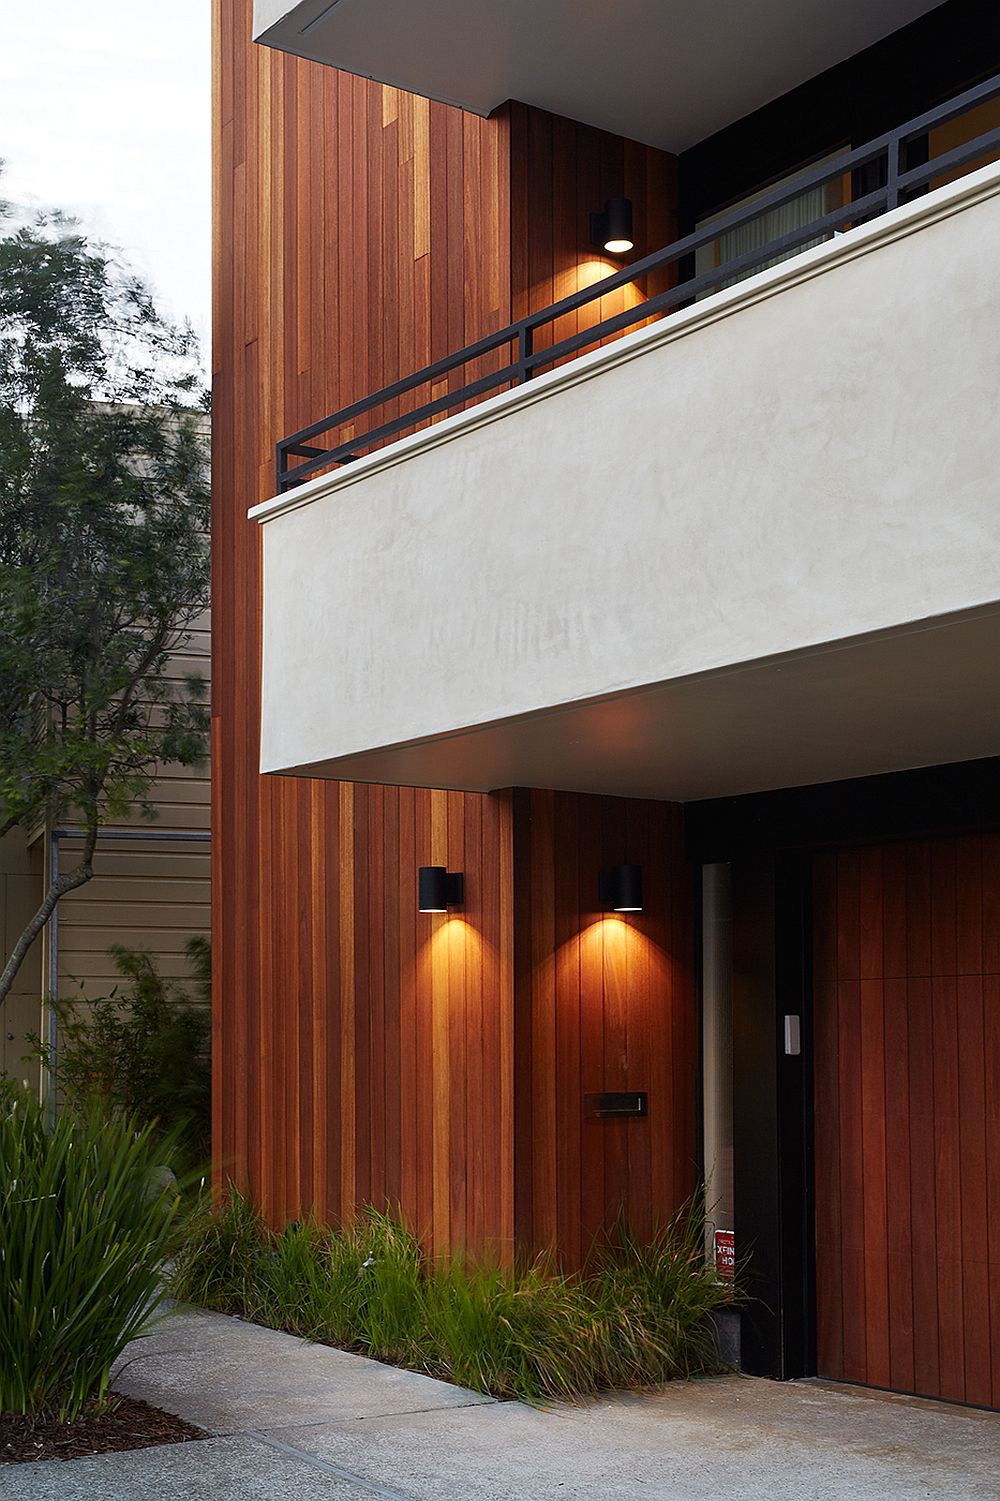 Plastered finish for the balconies gives the facade a fresh, contemporary look